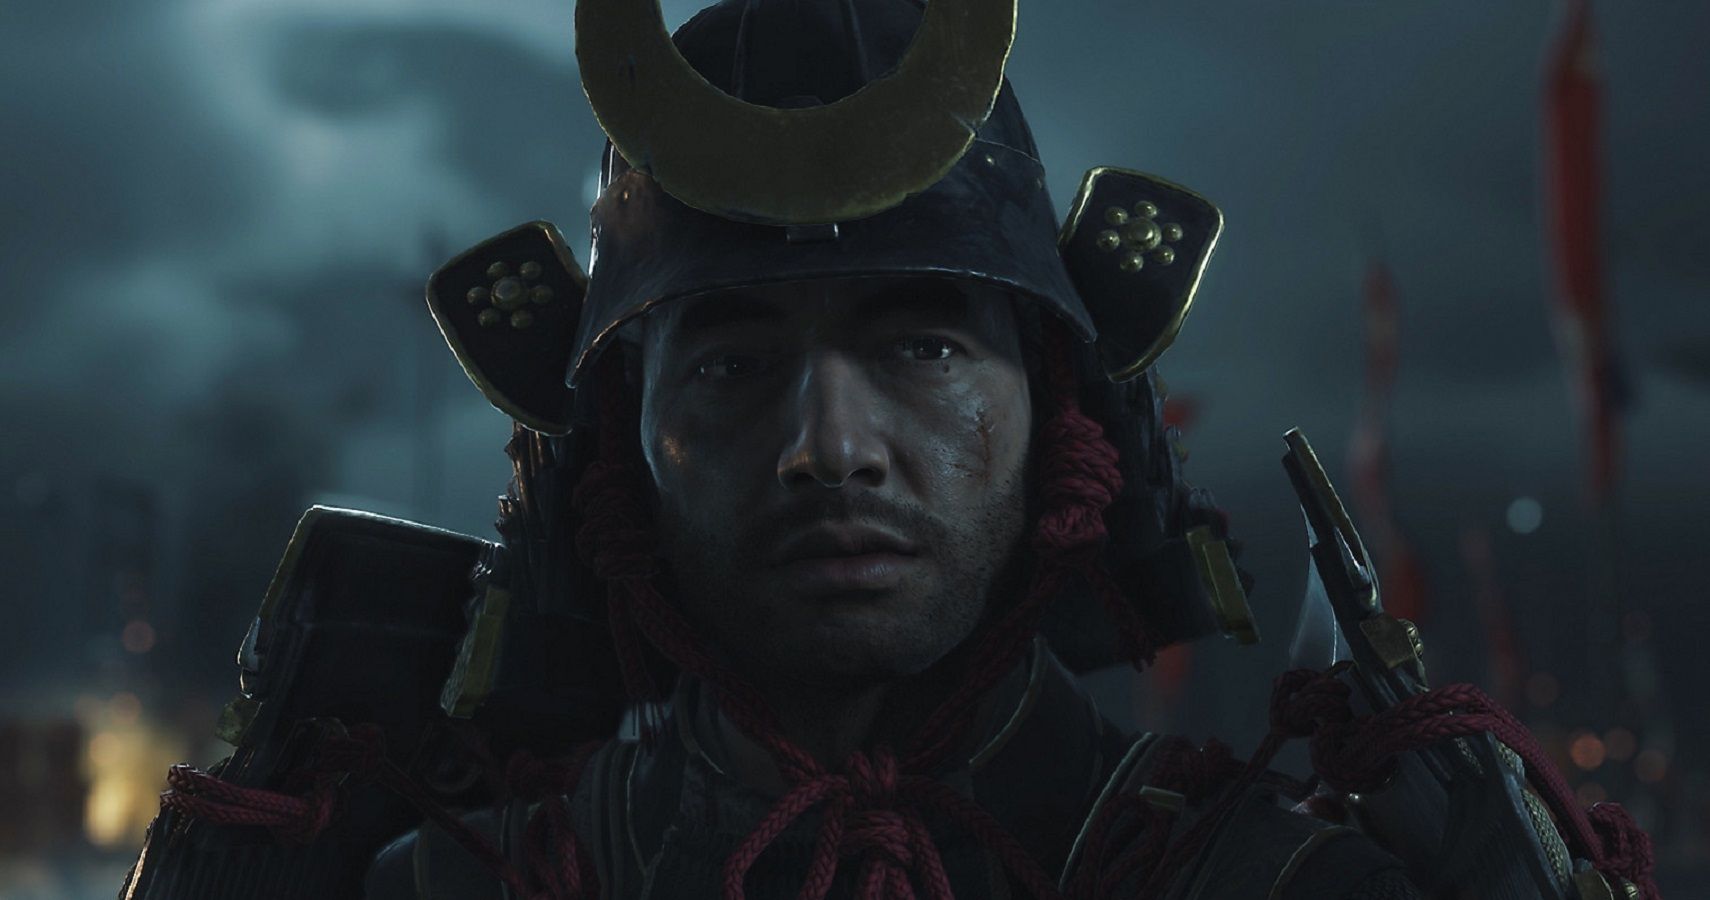 ghost of tsushima pc system requirements